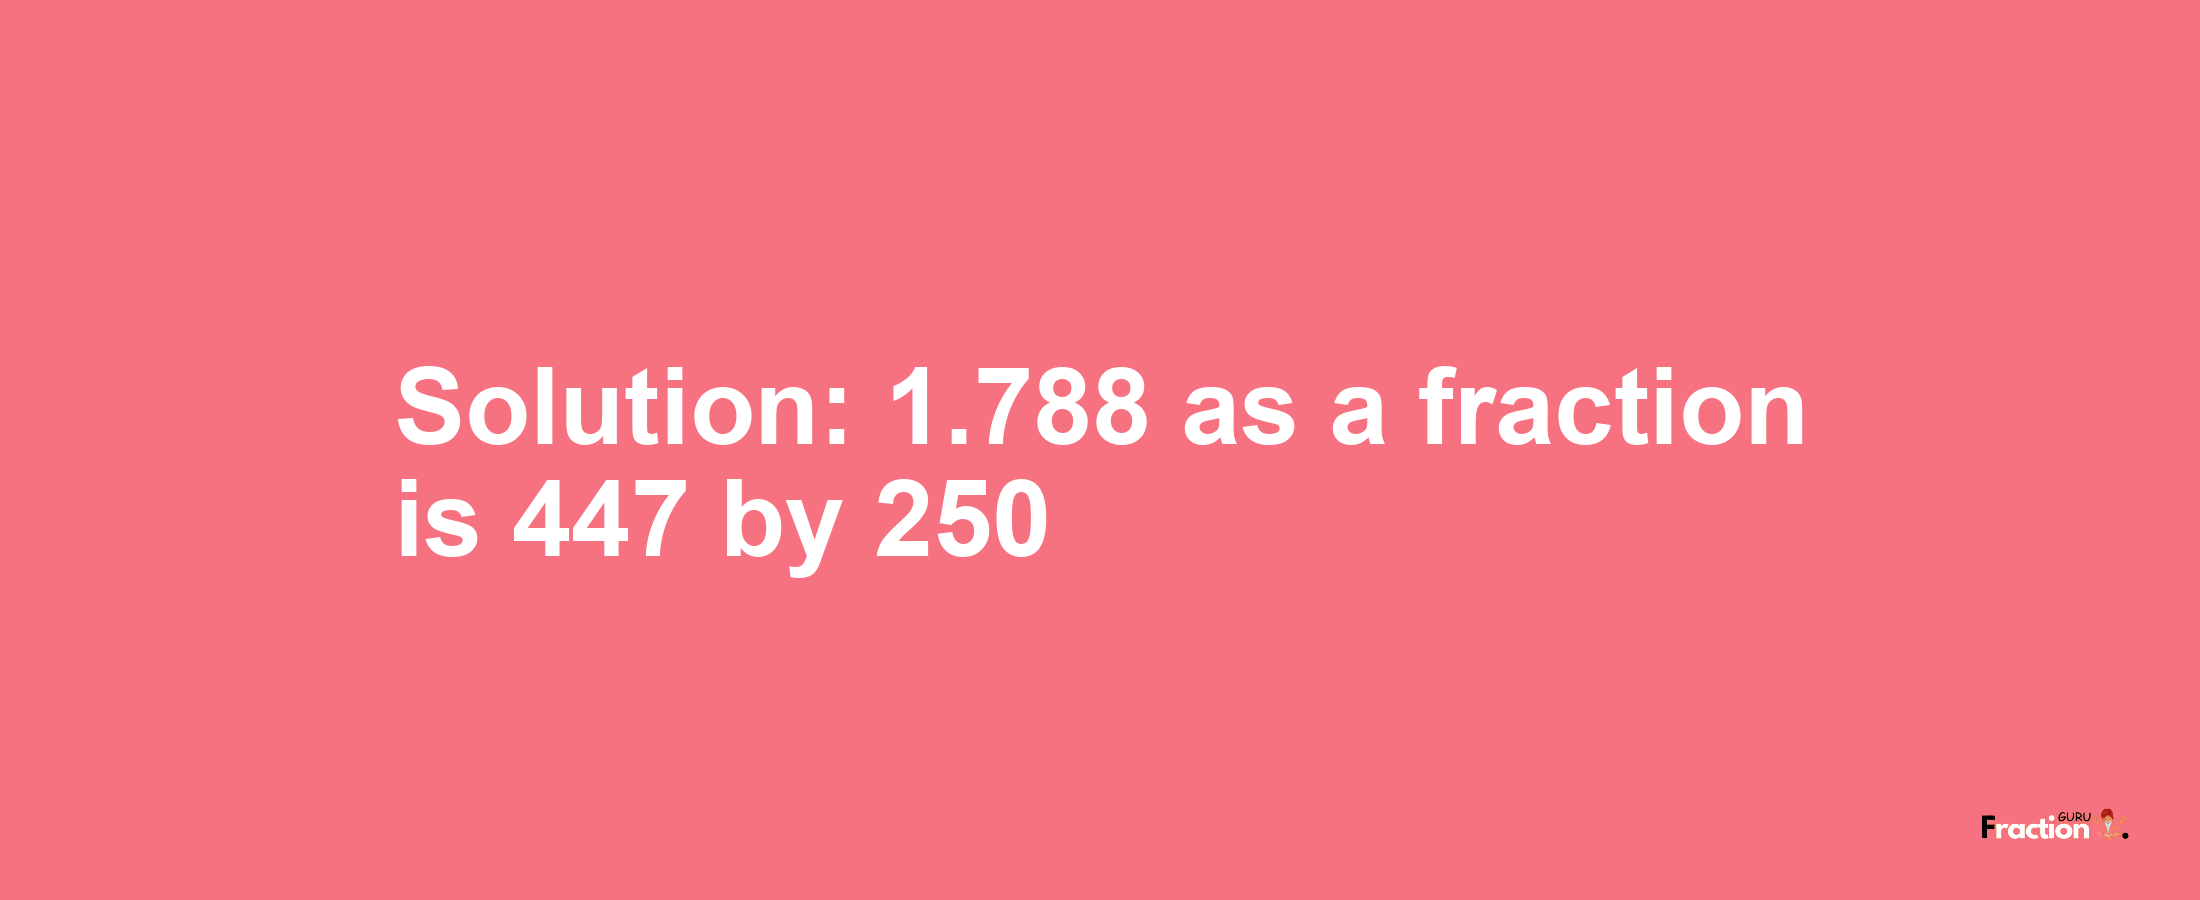 Solution:1.788 as a fraction is 447/250